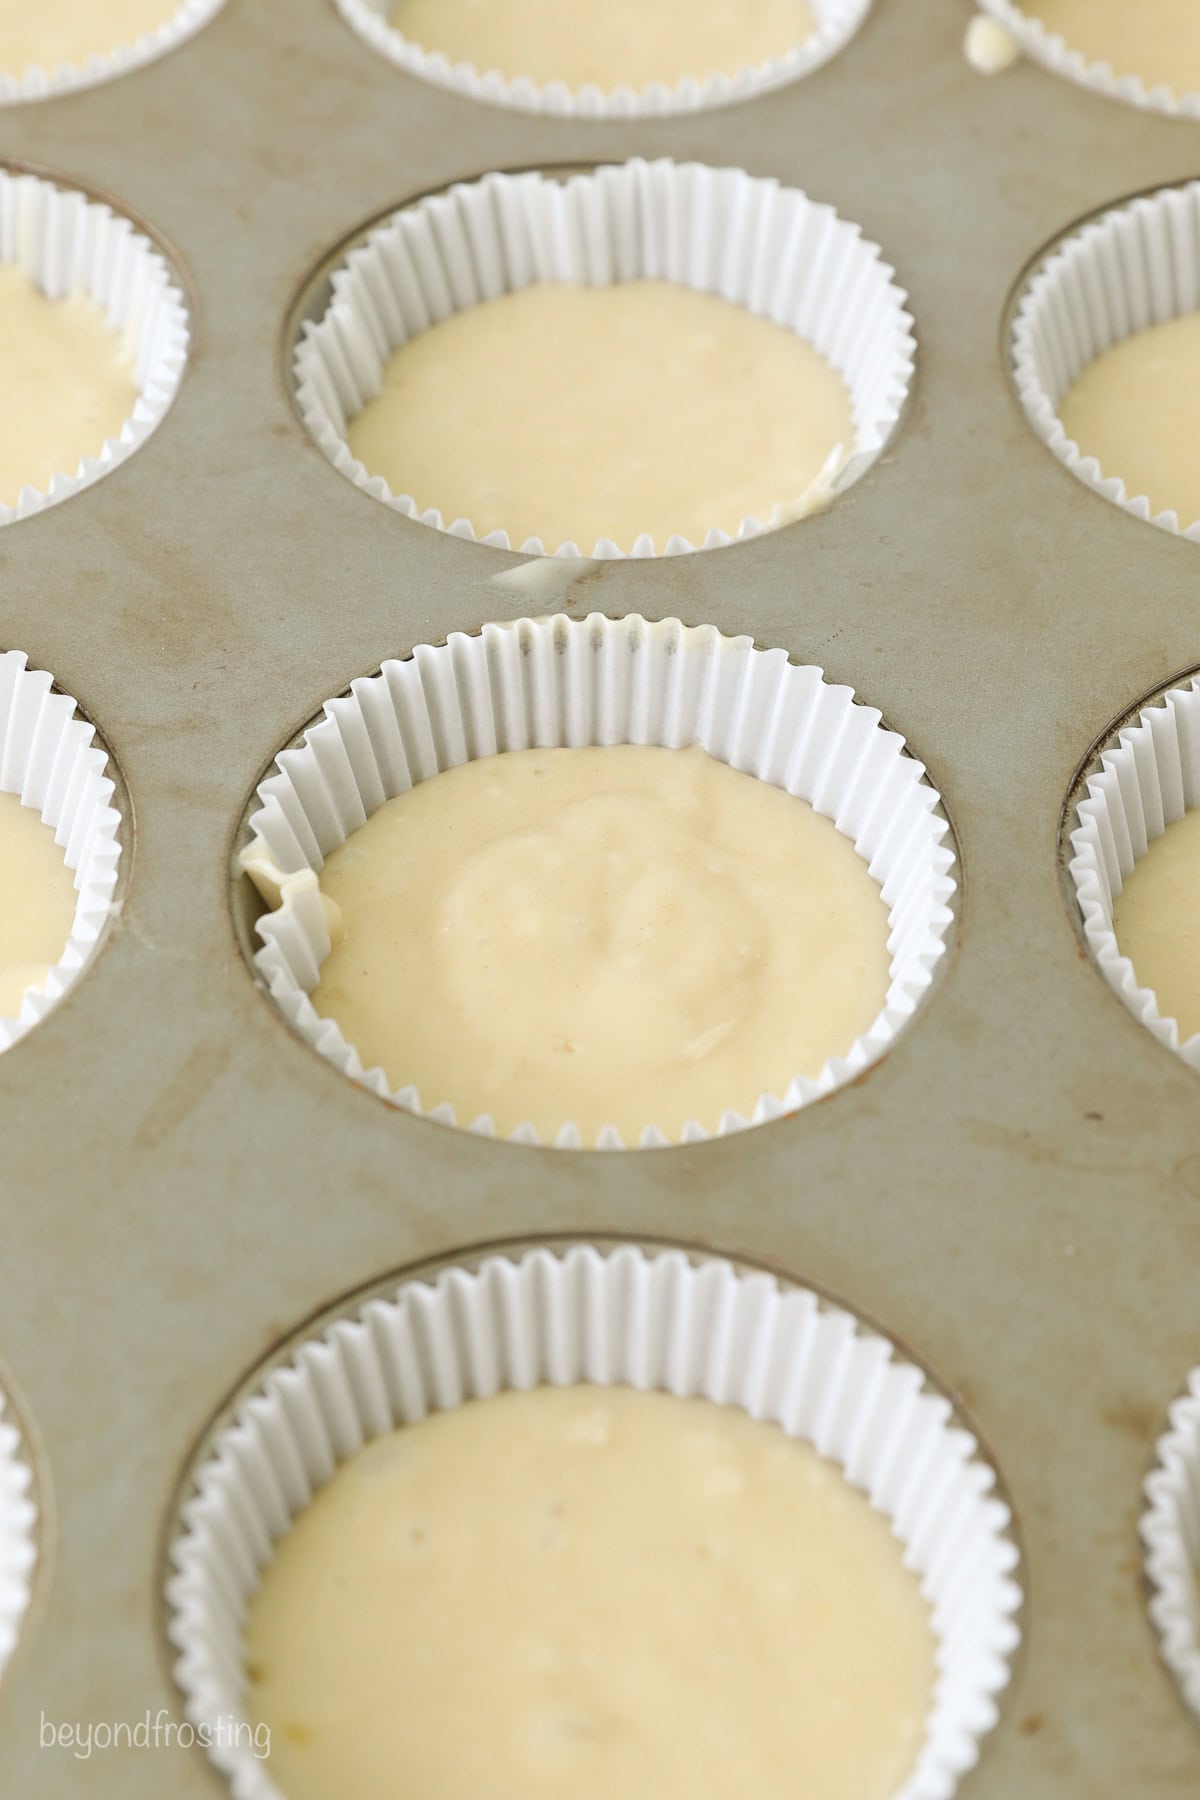 A lined cupcake pan filled with yellow cupcake batter.